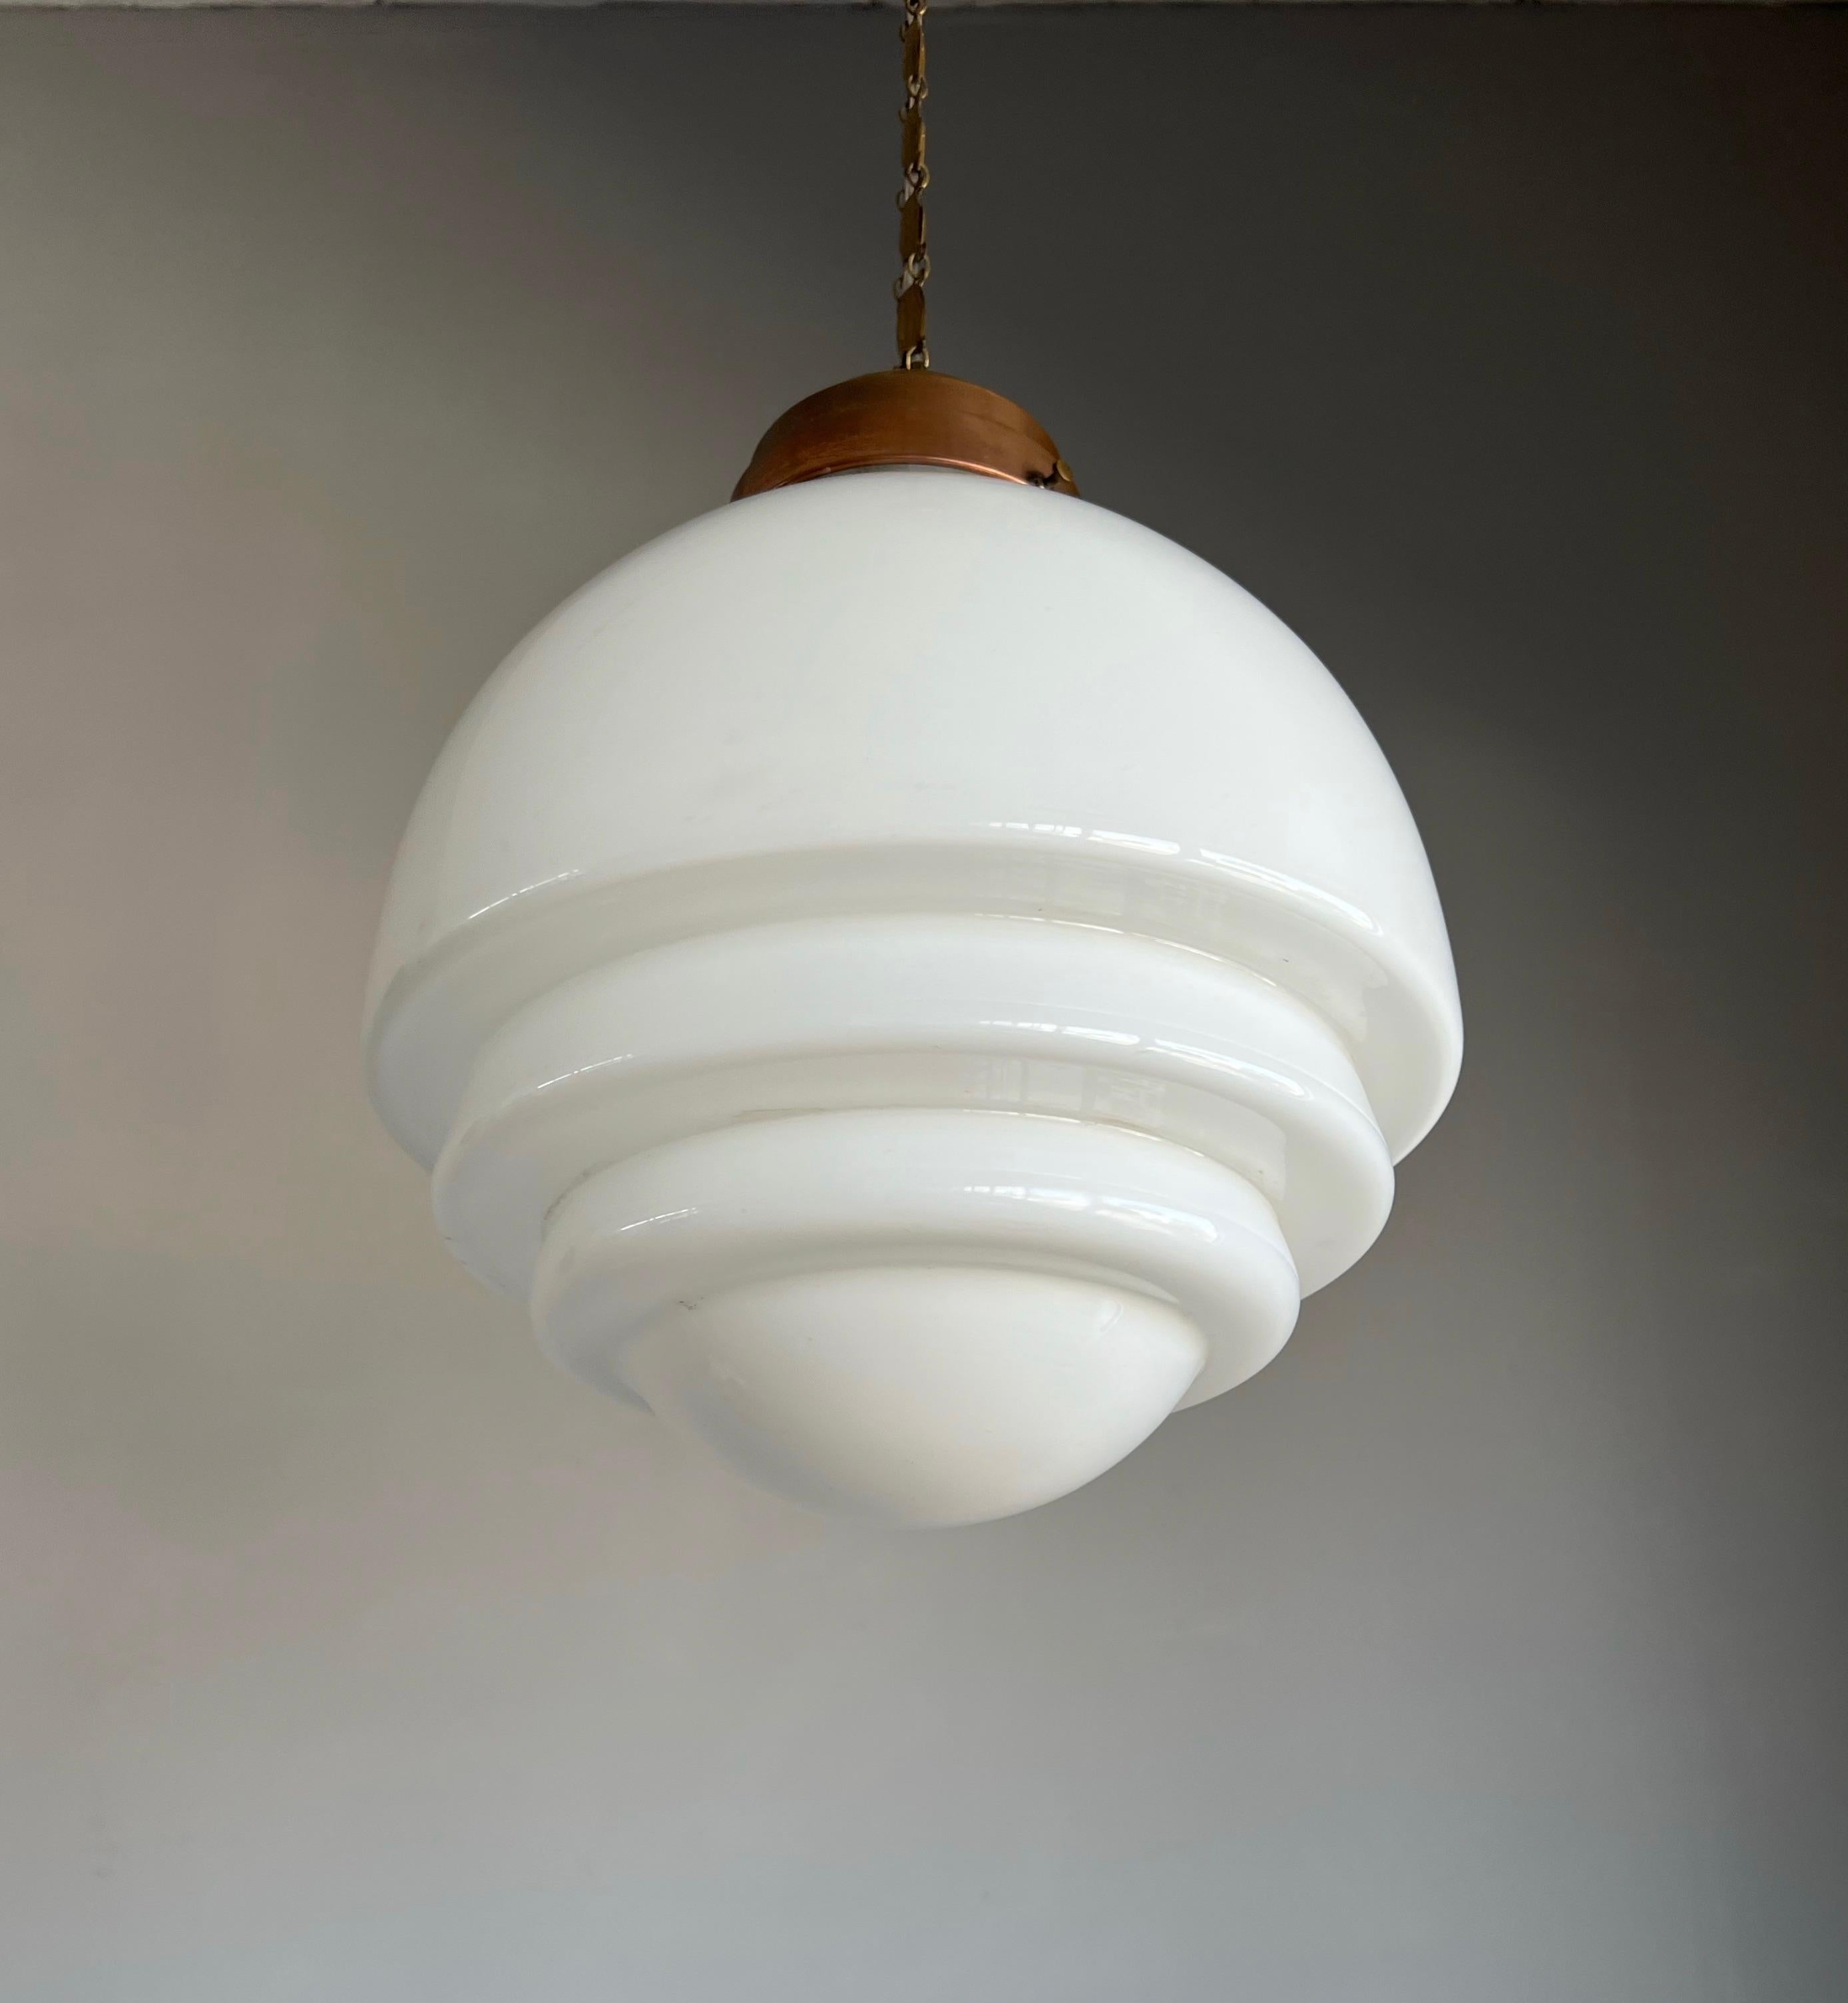 Large size and great shape Bauhaus pendant light.

If you are looking for a beautiful and truly stylish pendant for a midcentury, for an Art Deco or for a contemporary, Industrial Style interior then this could be your perfect lighting solution.